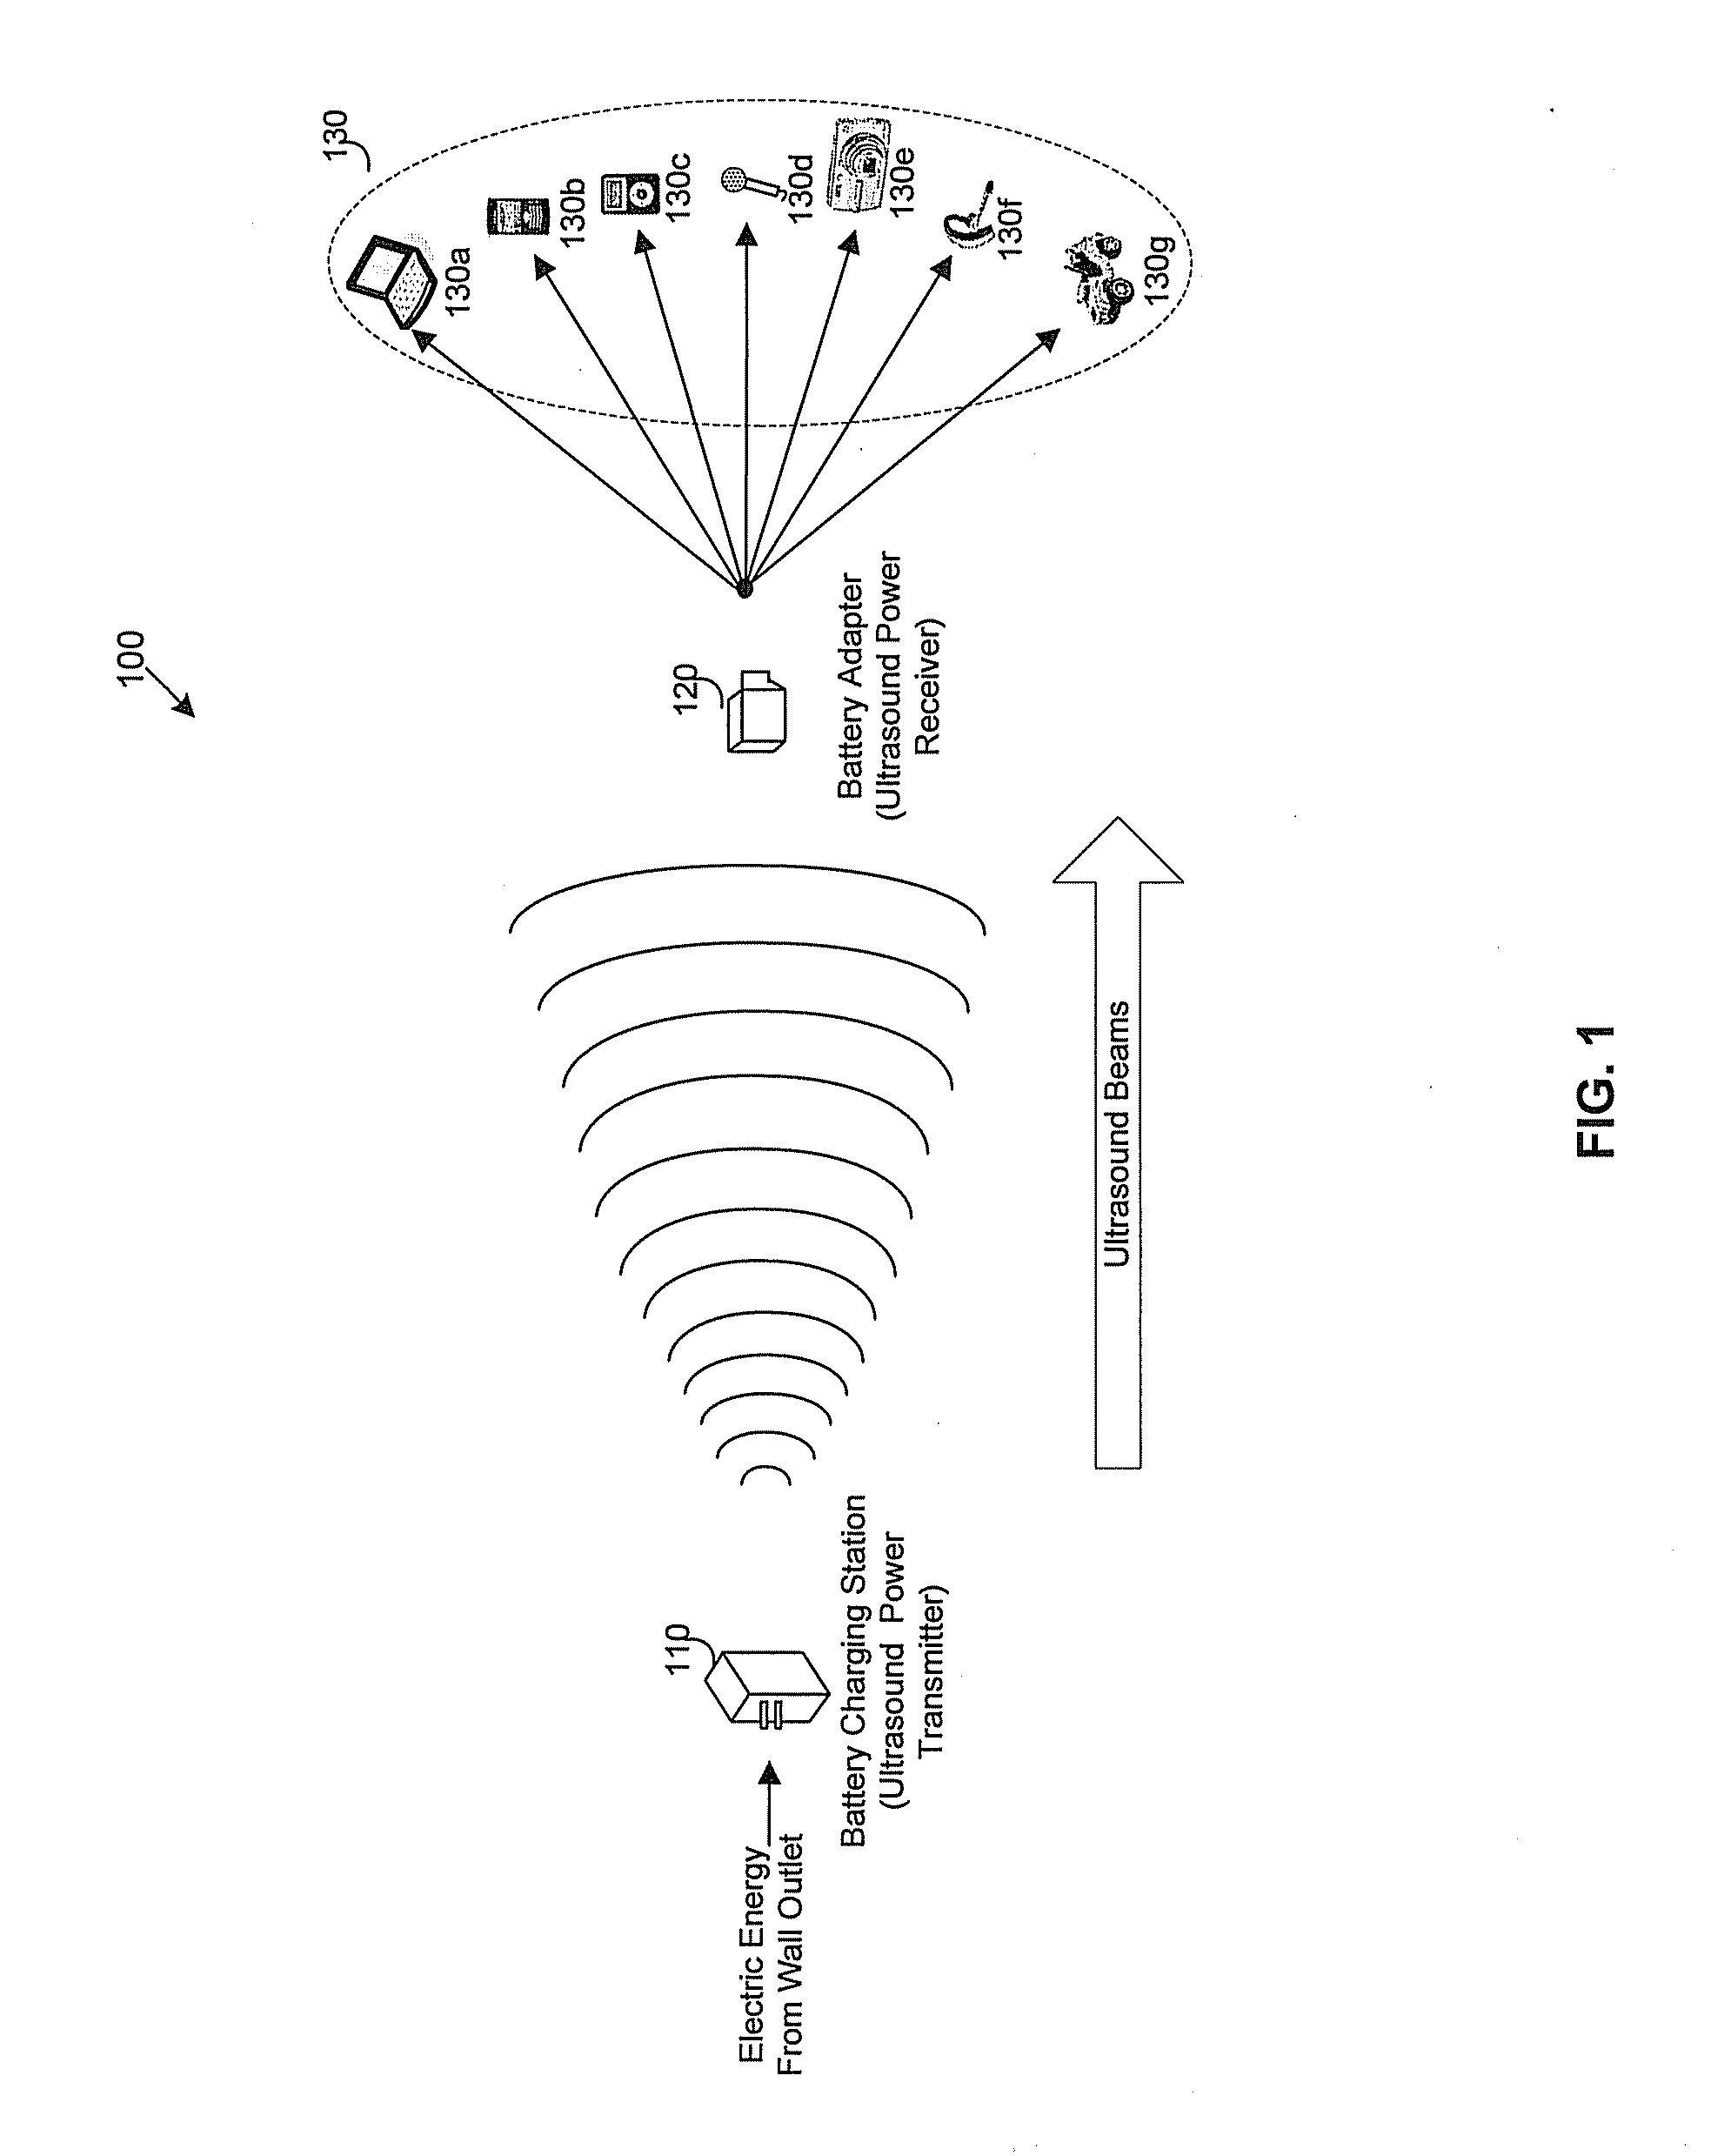 Method and system for wireless battery charging utilizing ultrasonic transducer array based beamforming